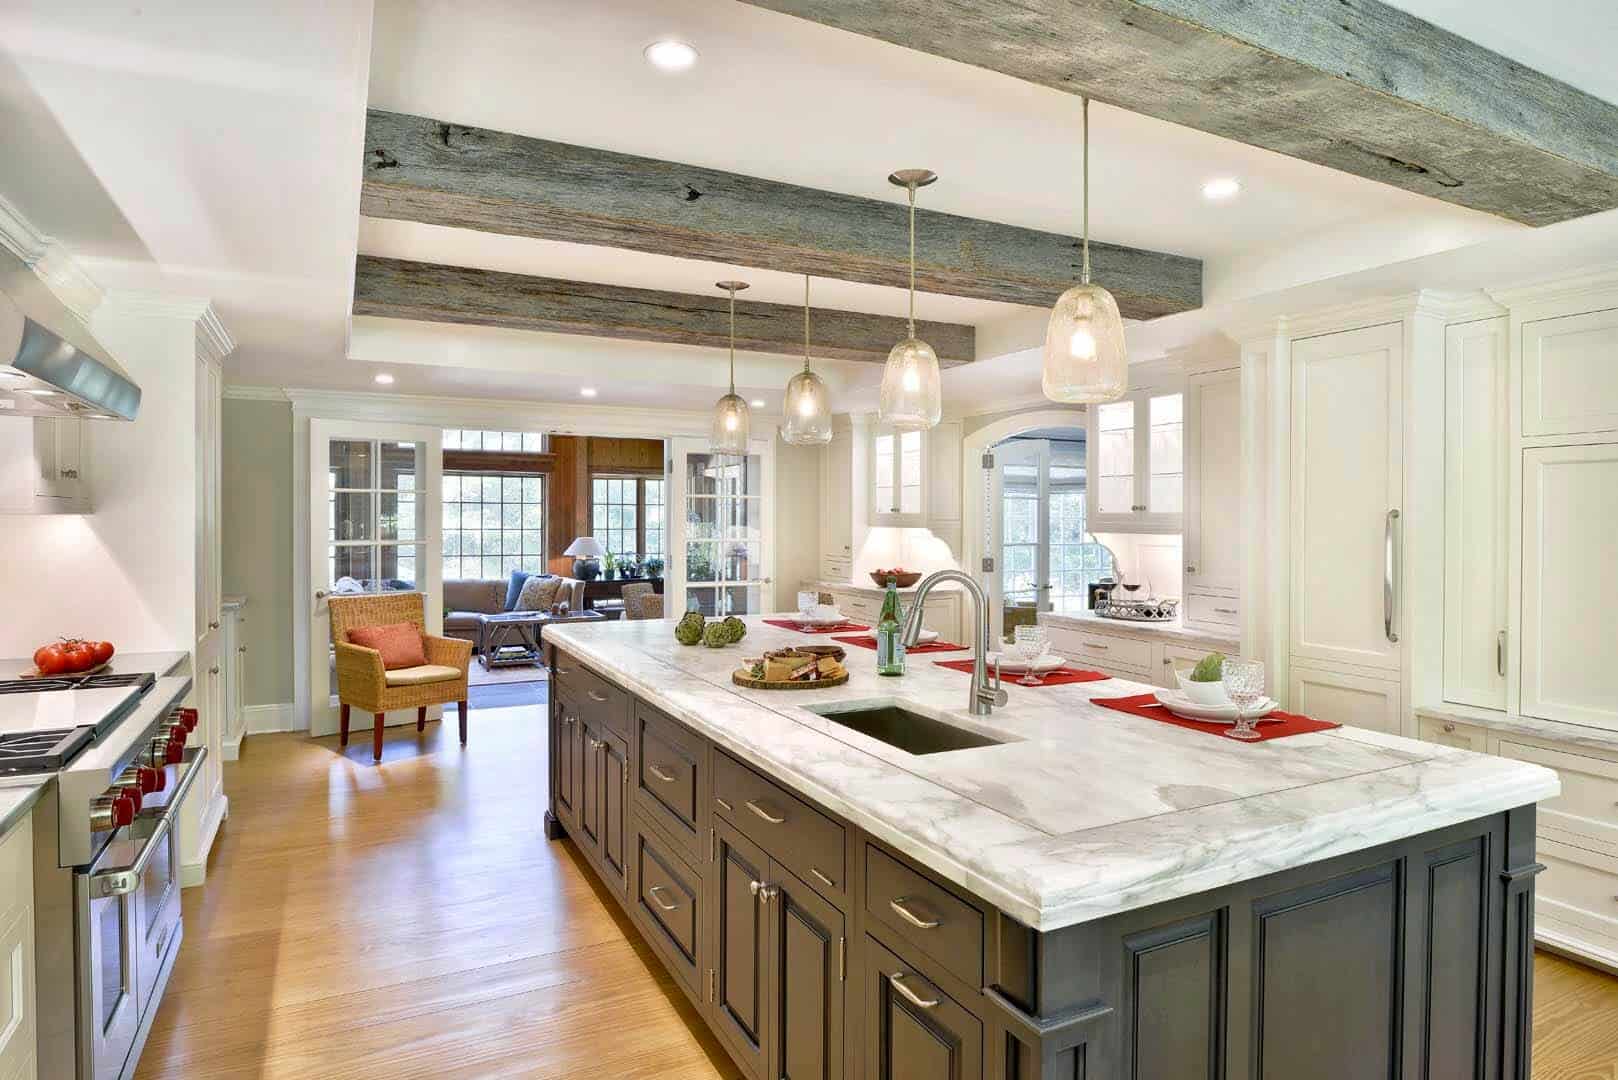 Expansive Bedford kitchen features exposed beams, white Bilotta cabinetry and large grey island with marble top.